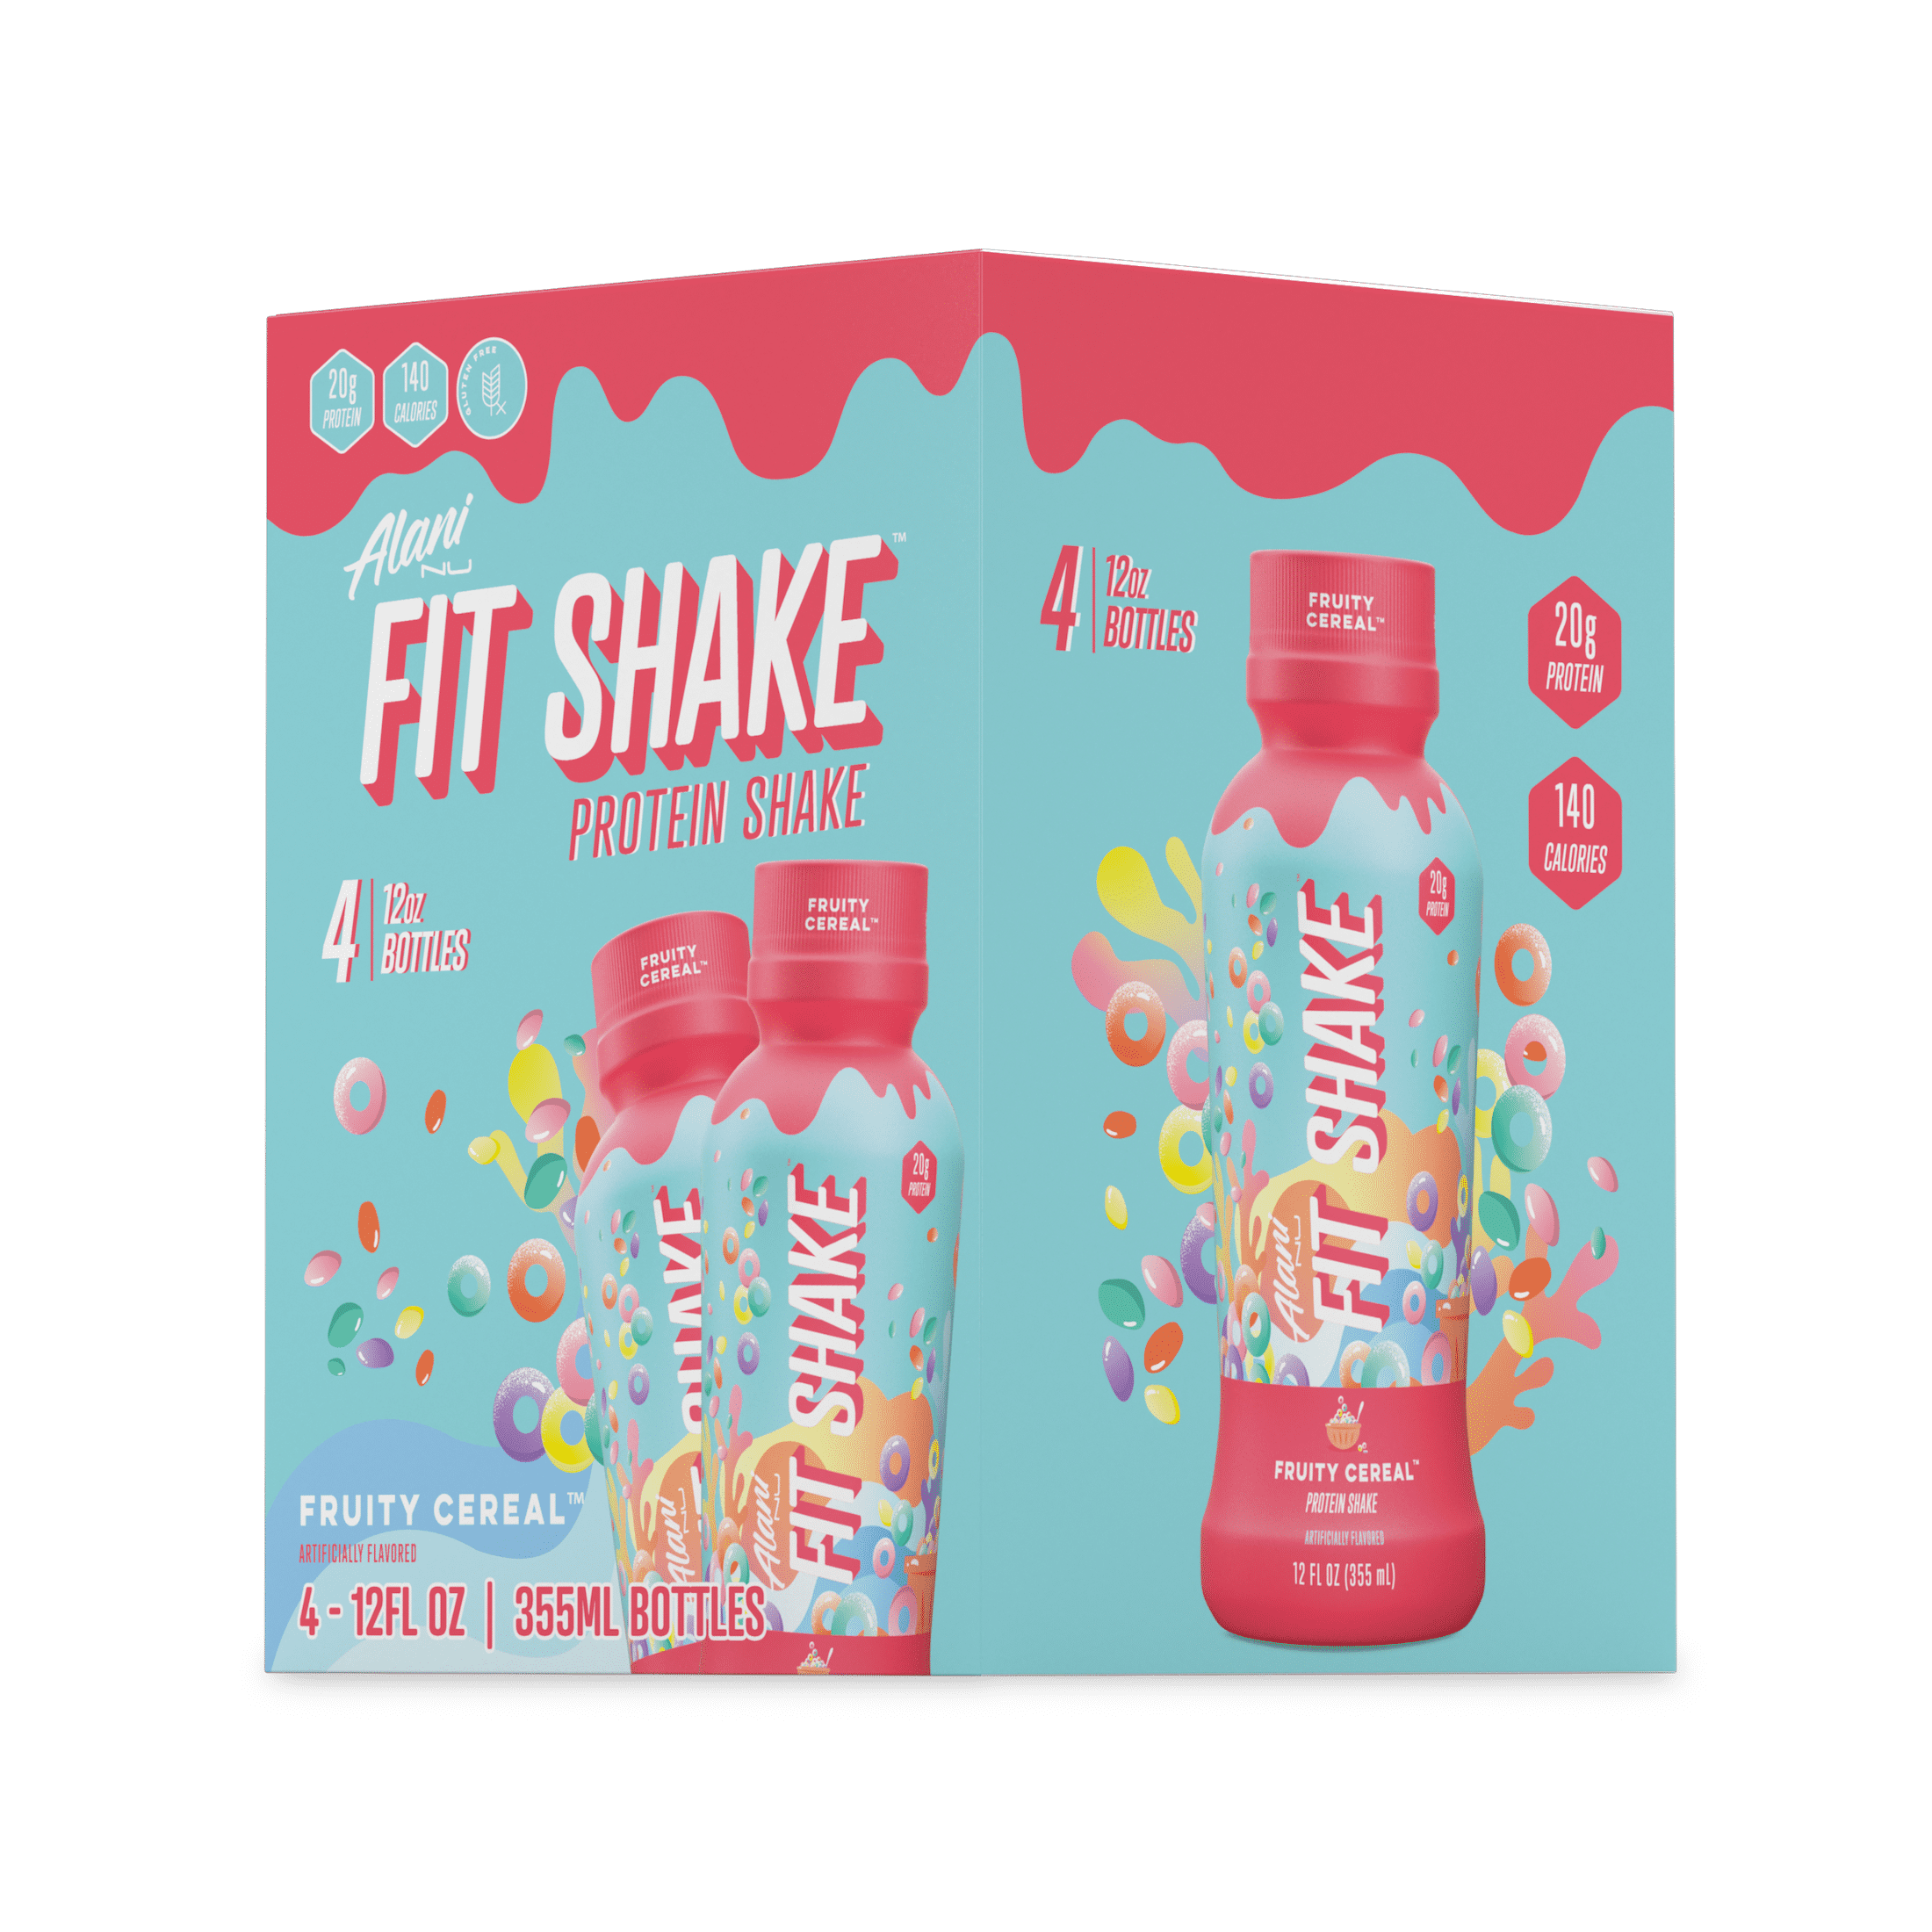 Supplement King Regina Victoria Ave - NEW! Alani Nu Fit Shake! 💜 These  ready-to-drink shakes are 140 cals and 20g of protein! We currently have  the Fruity Cereal 🥣 and Munchies 🥨